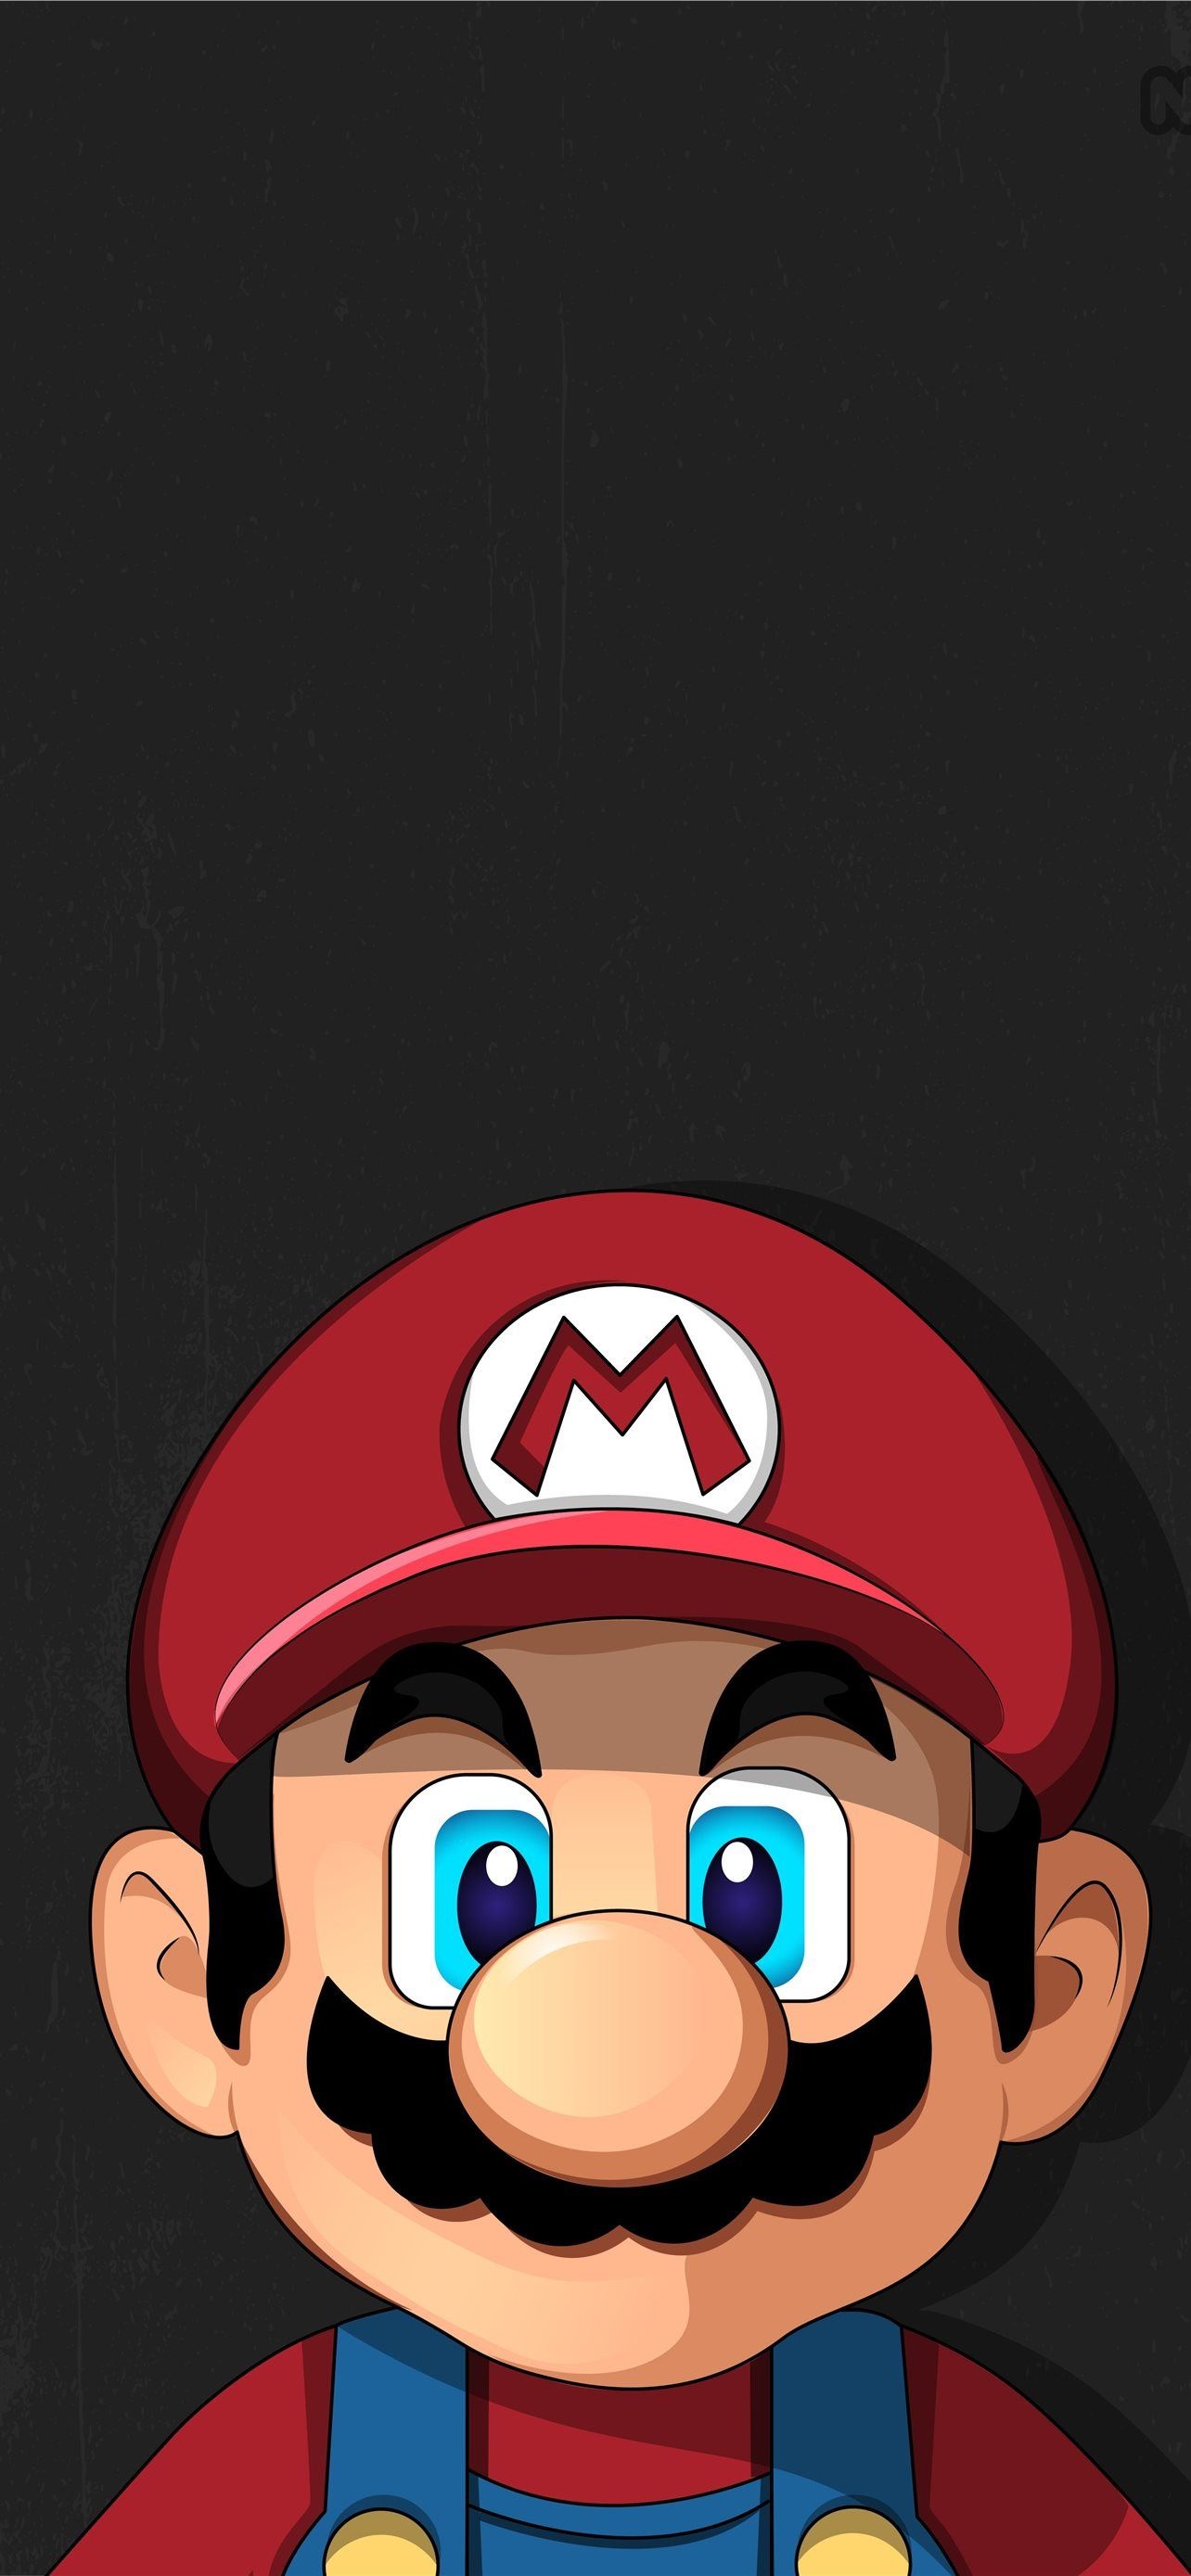 Mario Bros. Wallpapers (47+ images inside)